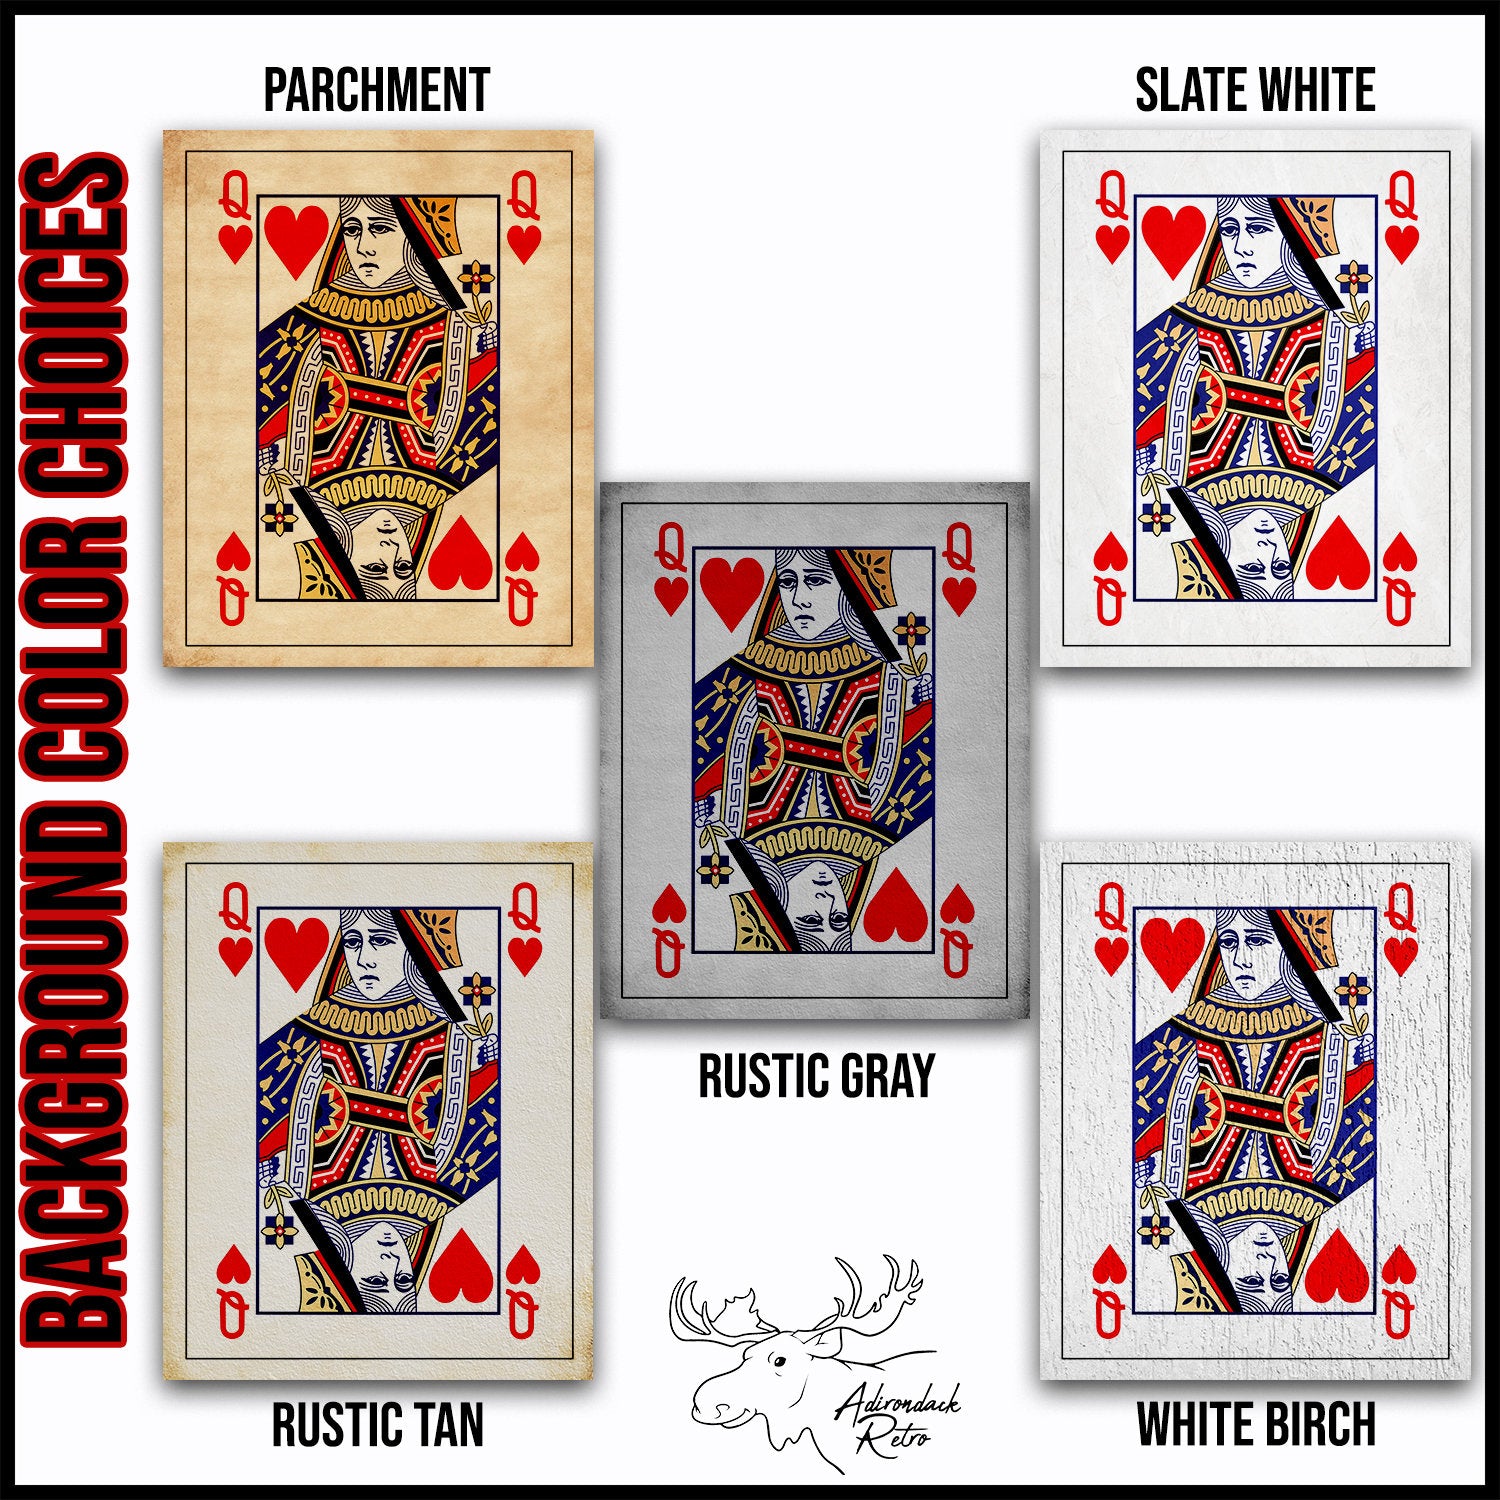 Ace and King of Spades Playing Card Giclee Fine Art Prints - Big Slick - Black Jack